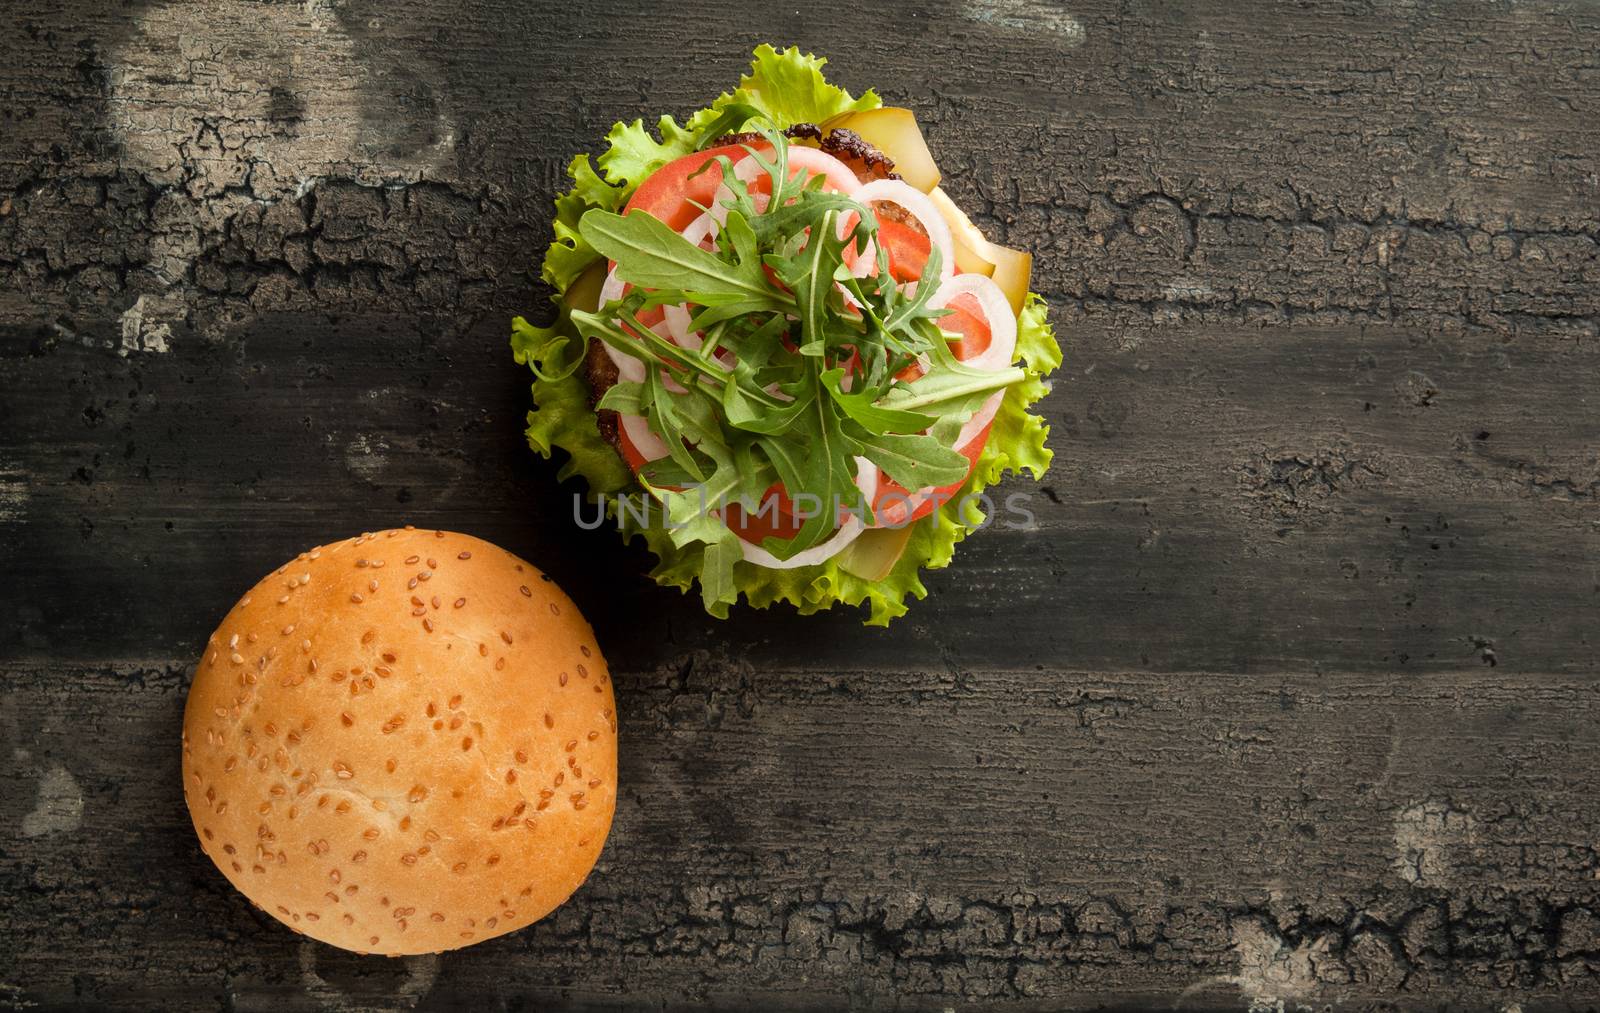 cheeseburger on an old wooden surface of dark color. hamburger with meat and tomato on an old wooden surface of dark color